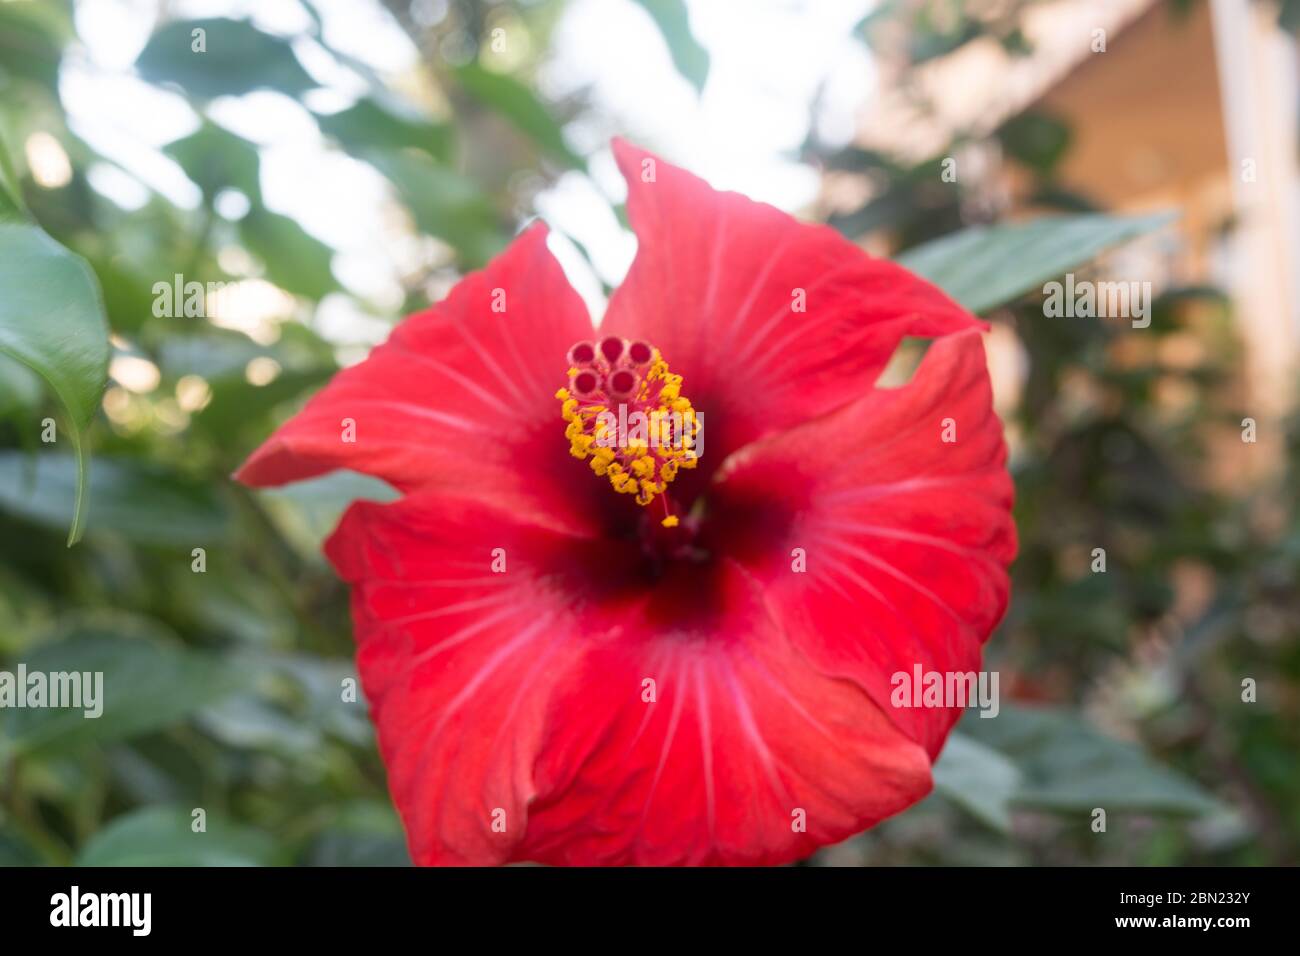 Closeup of the flower Hibiscus rosa sinensis revealing male and female genitalia stamen and pistil Stock Photo